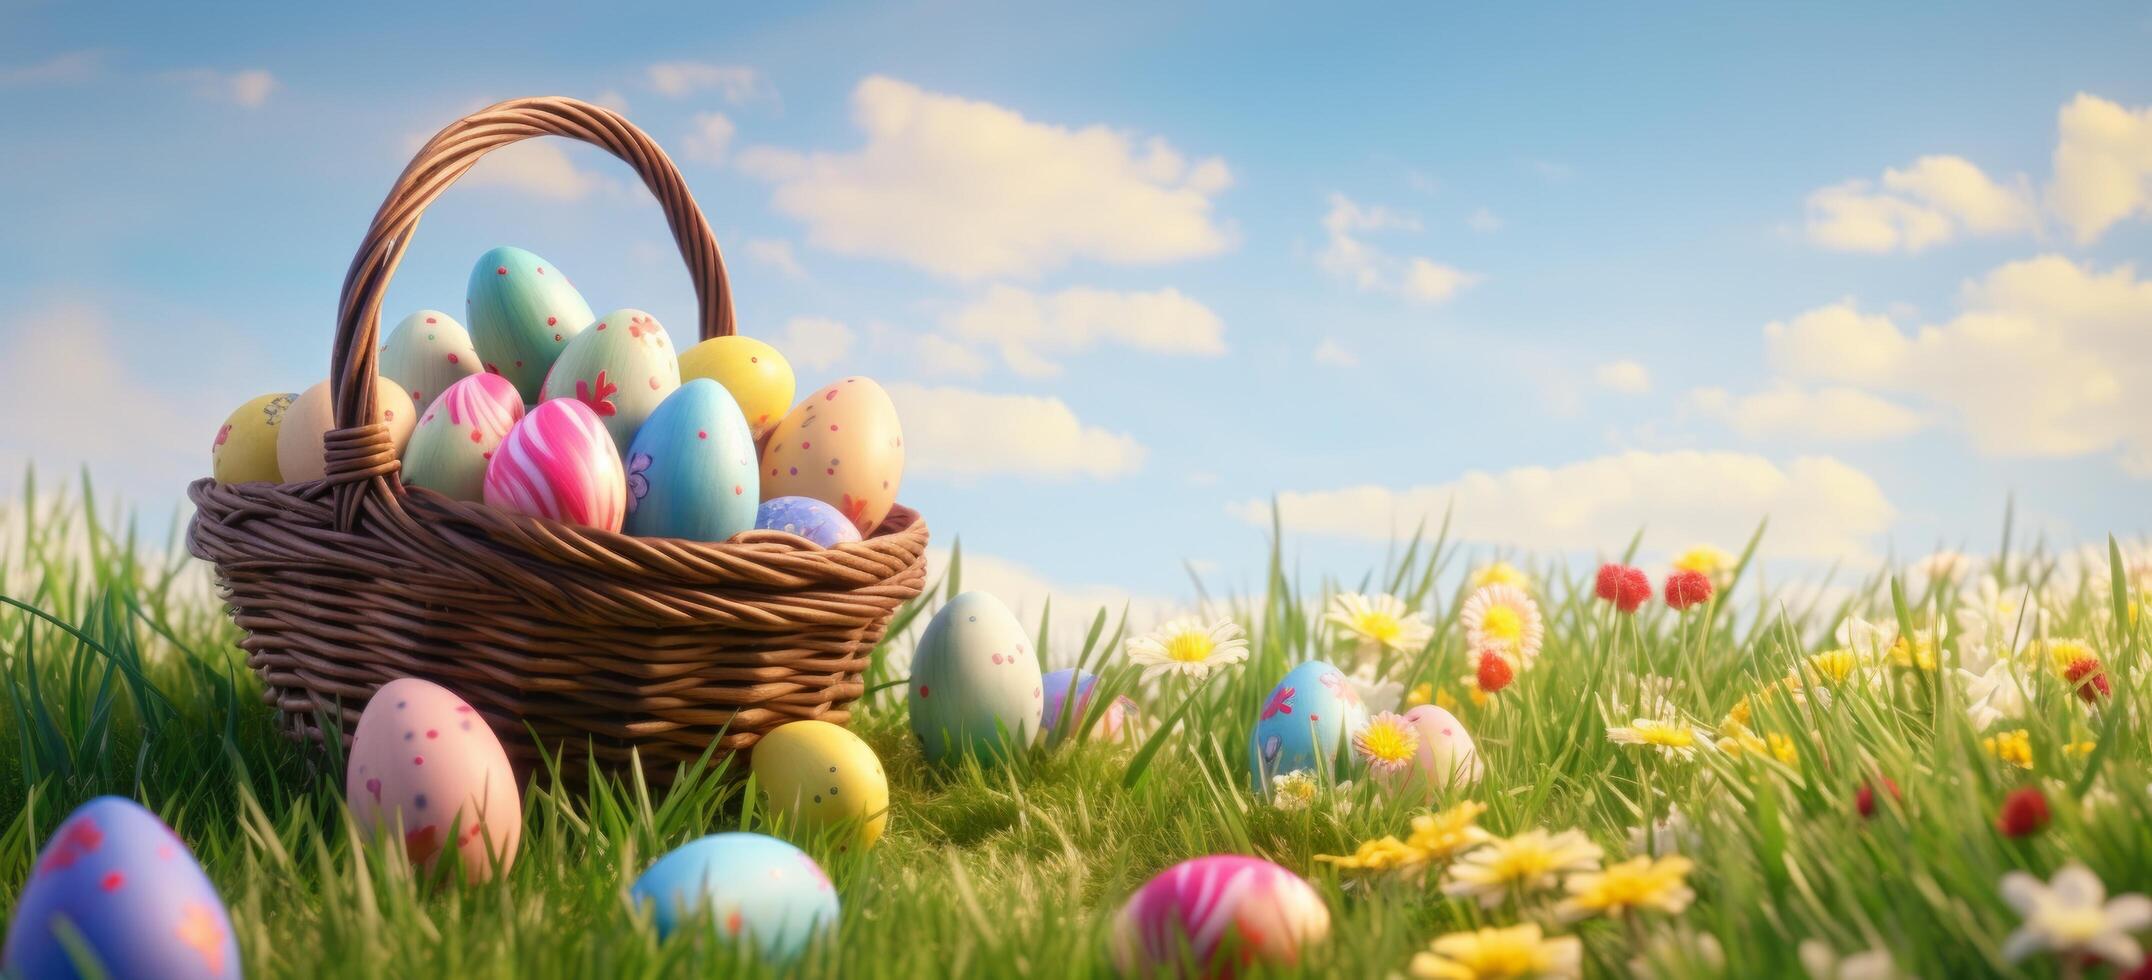 AI generated a basket full of colorful easter eggs are on a grassy meadow photo